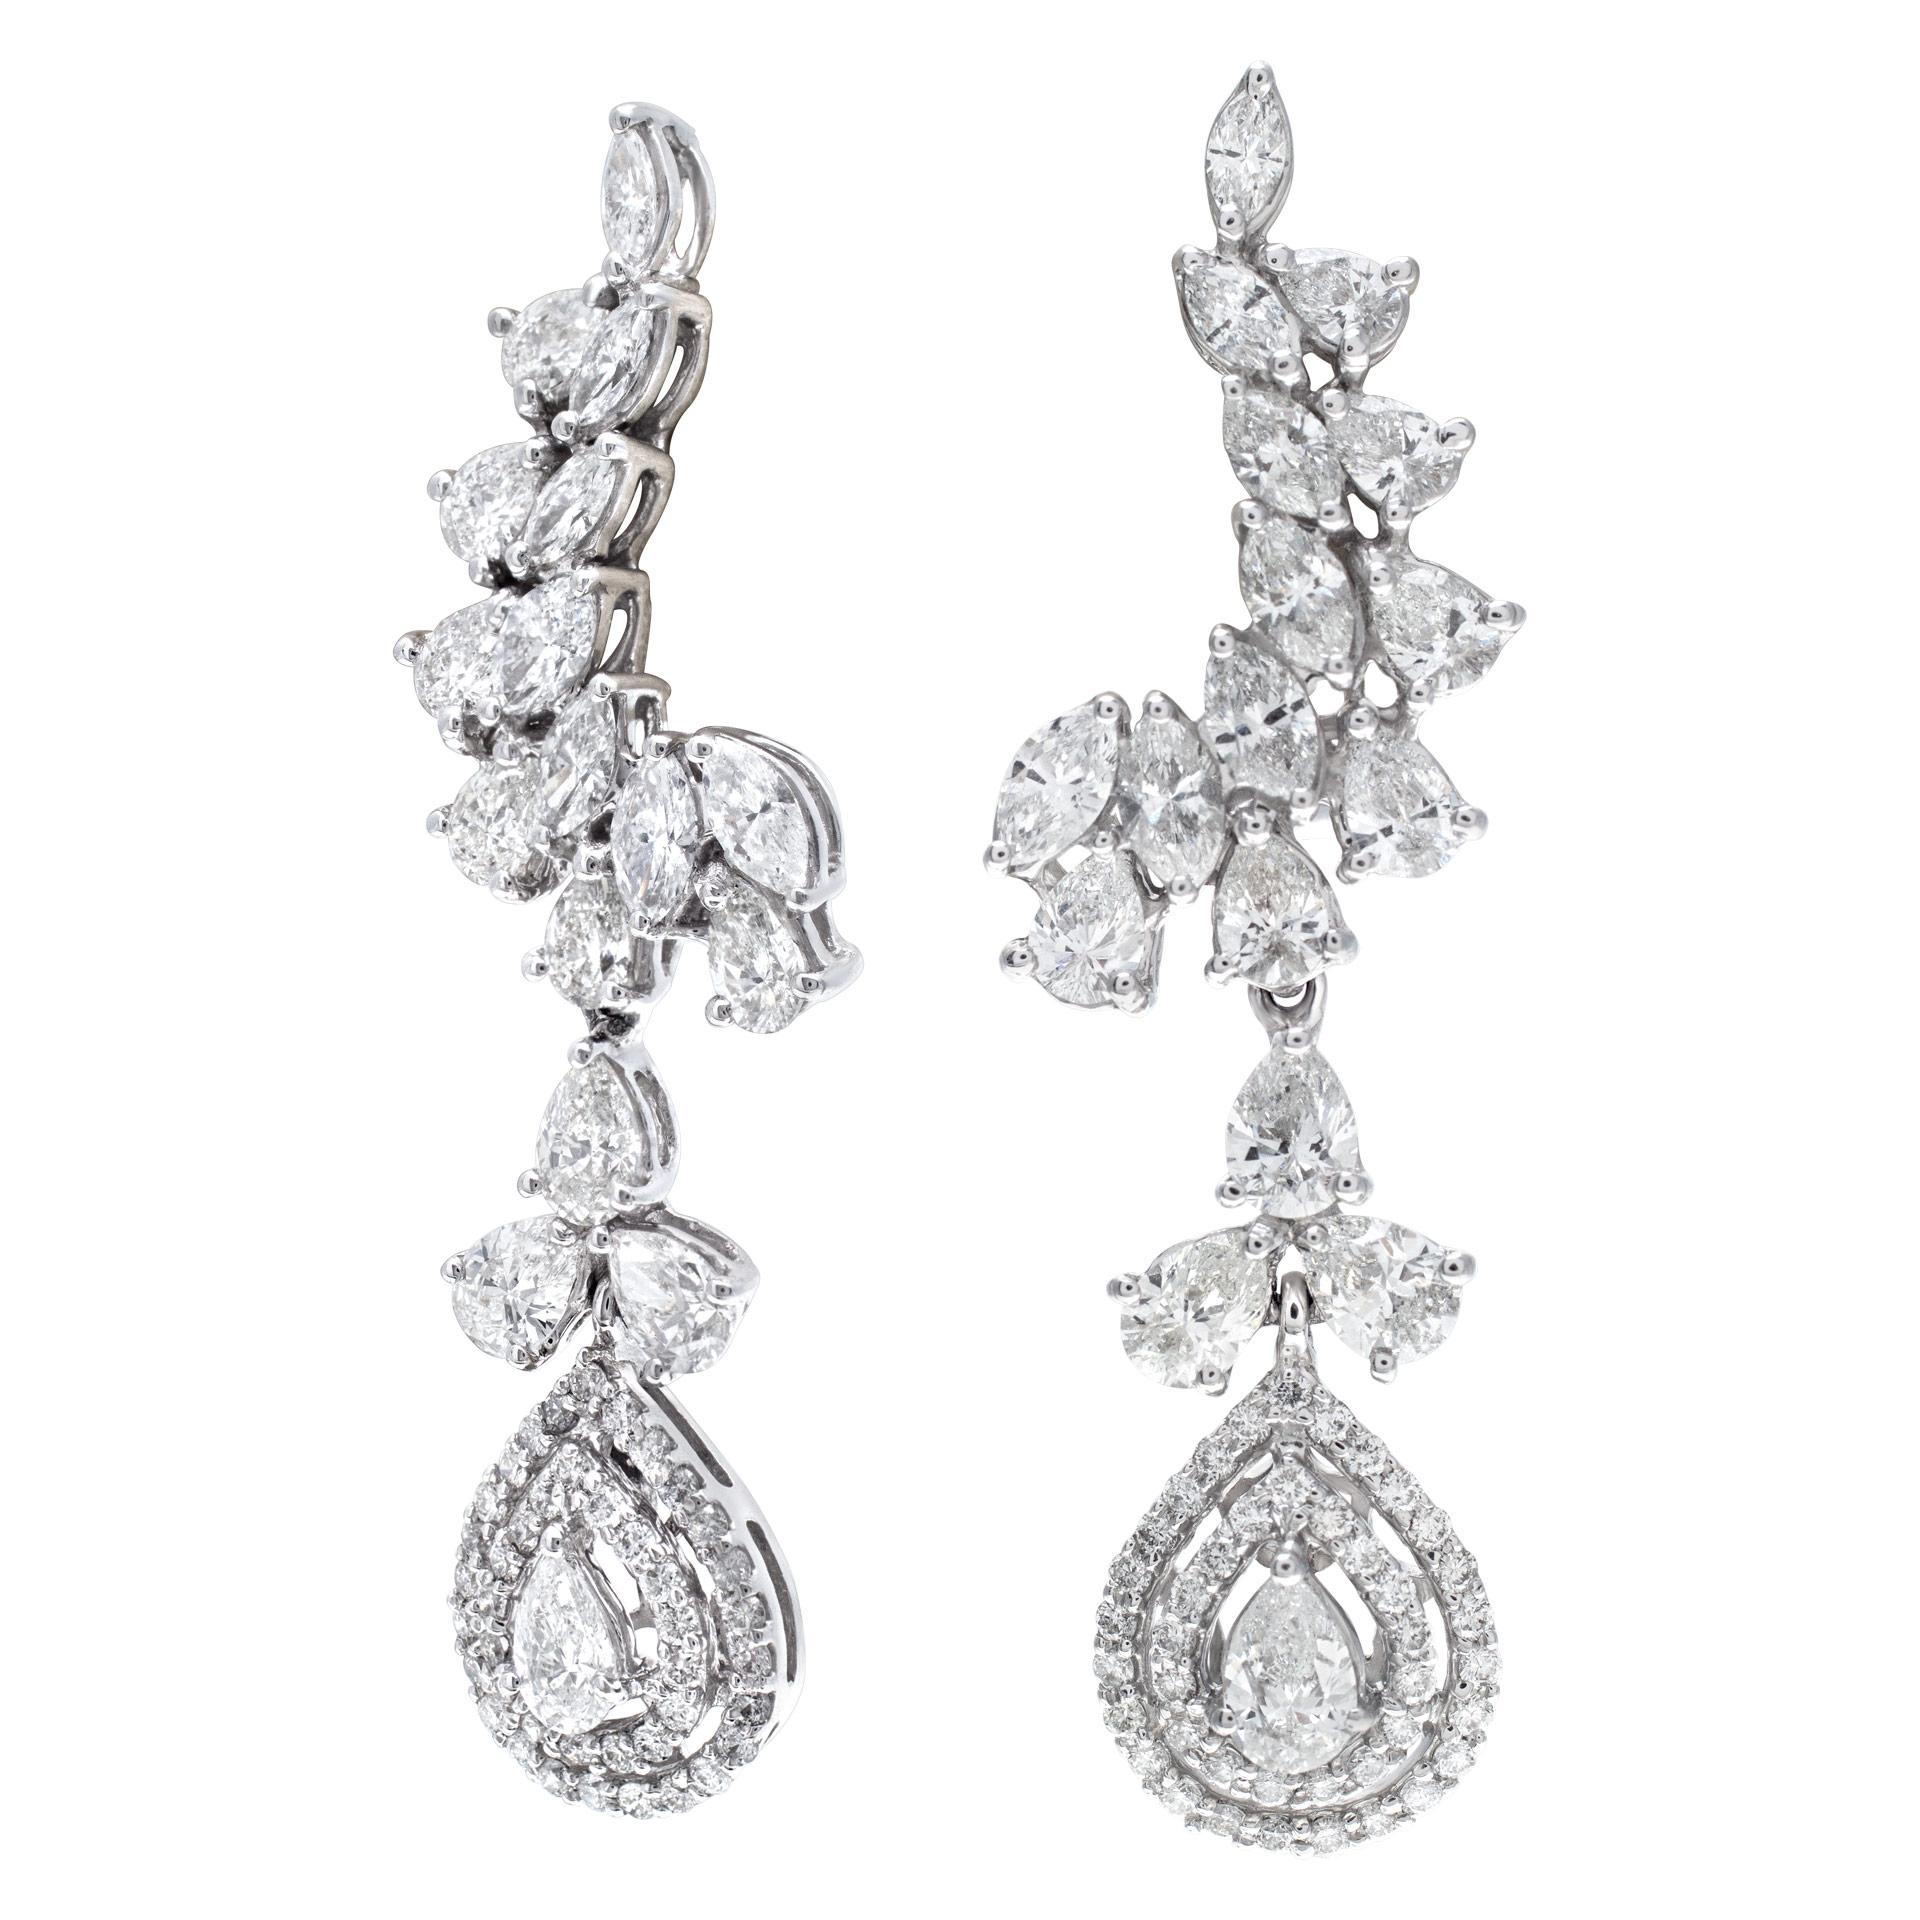 Dangling diamond earrings set in 18k white gold with approximately 5 carats of I-J color, SI clarity marquise, pear, and round cut diamonds. The dangling drop is a beautiful double halo of micro pave diamonds and center pear cut diamond is